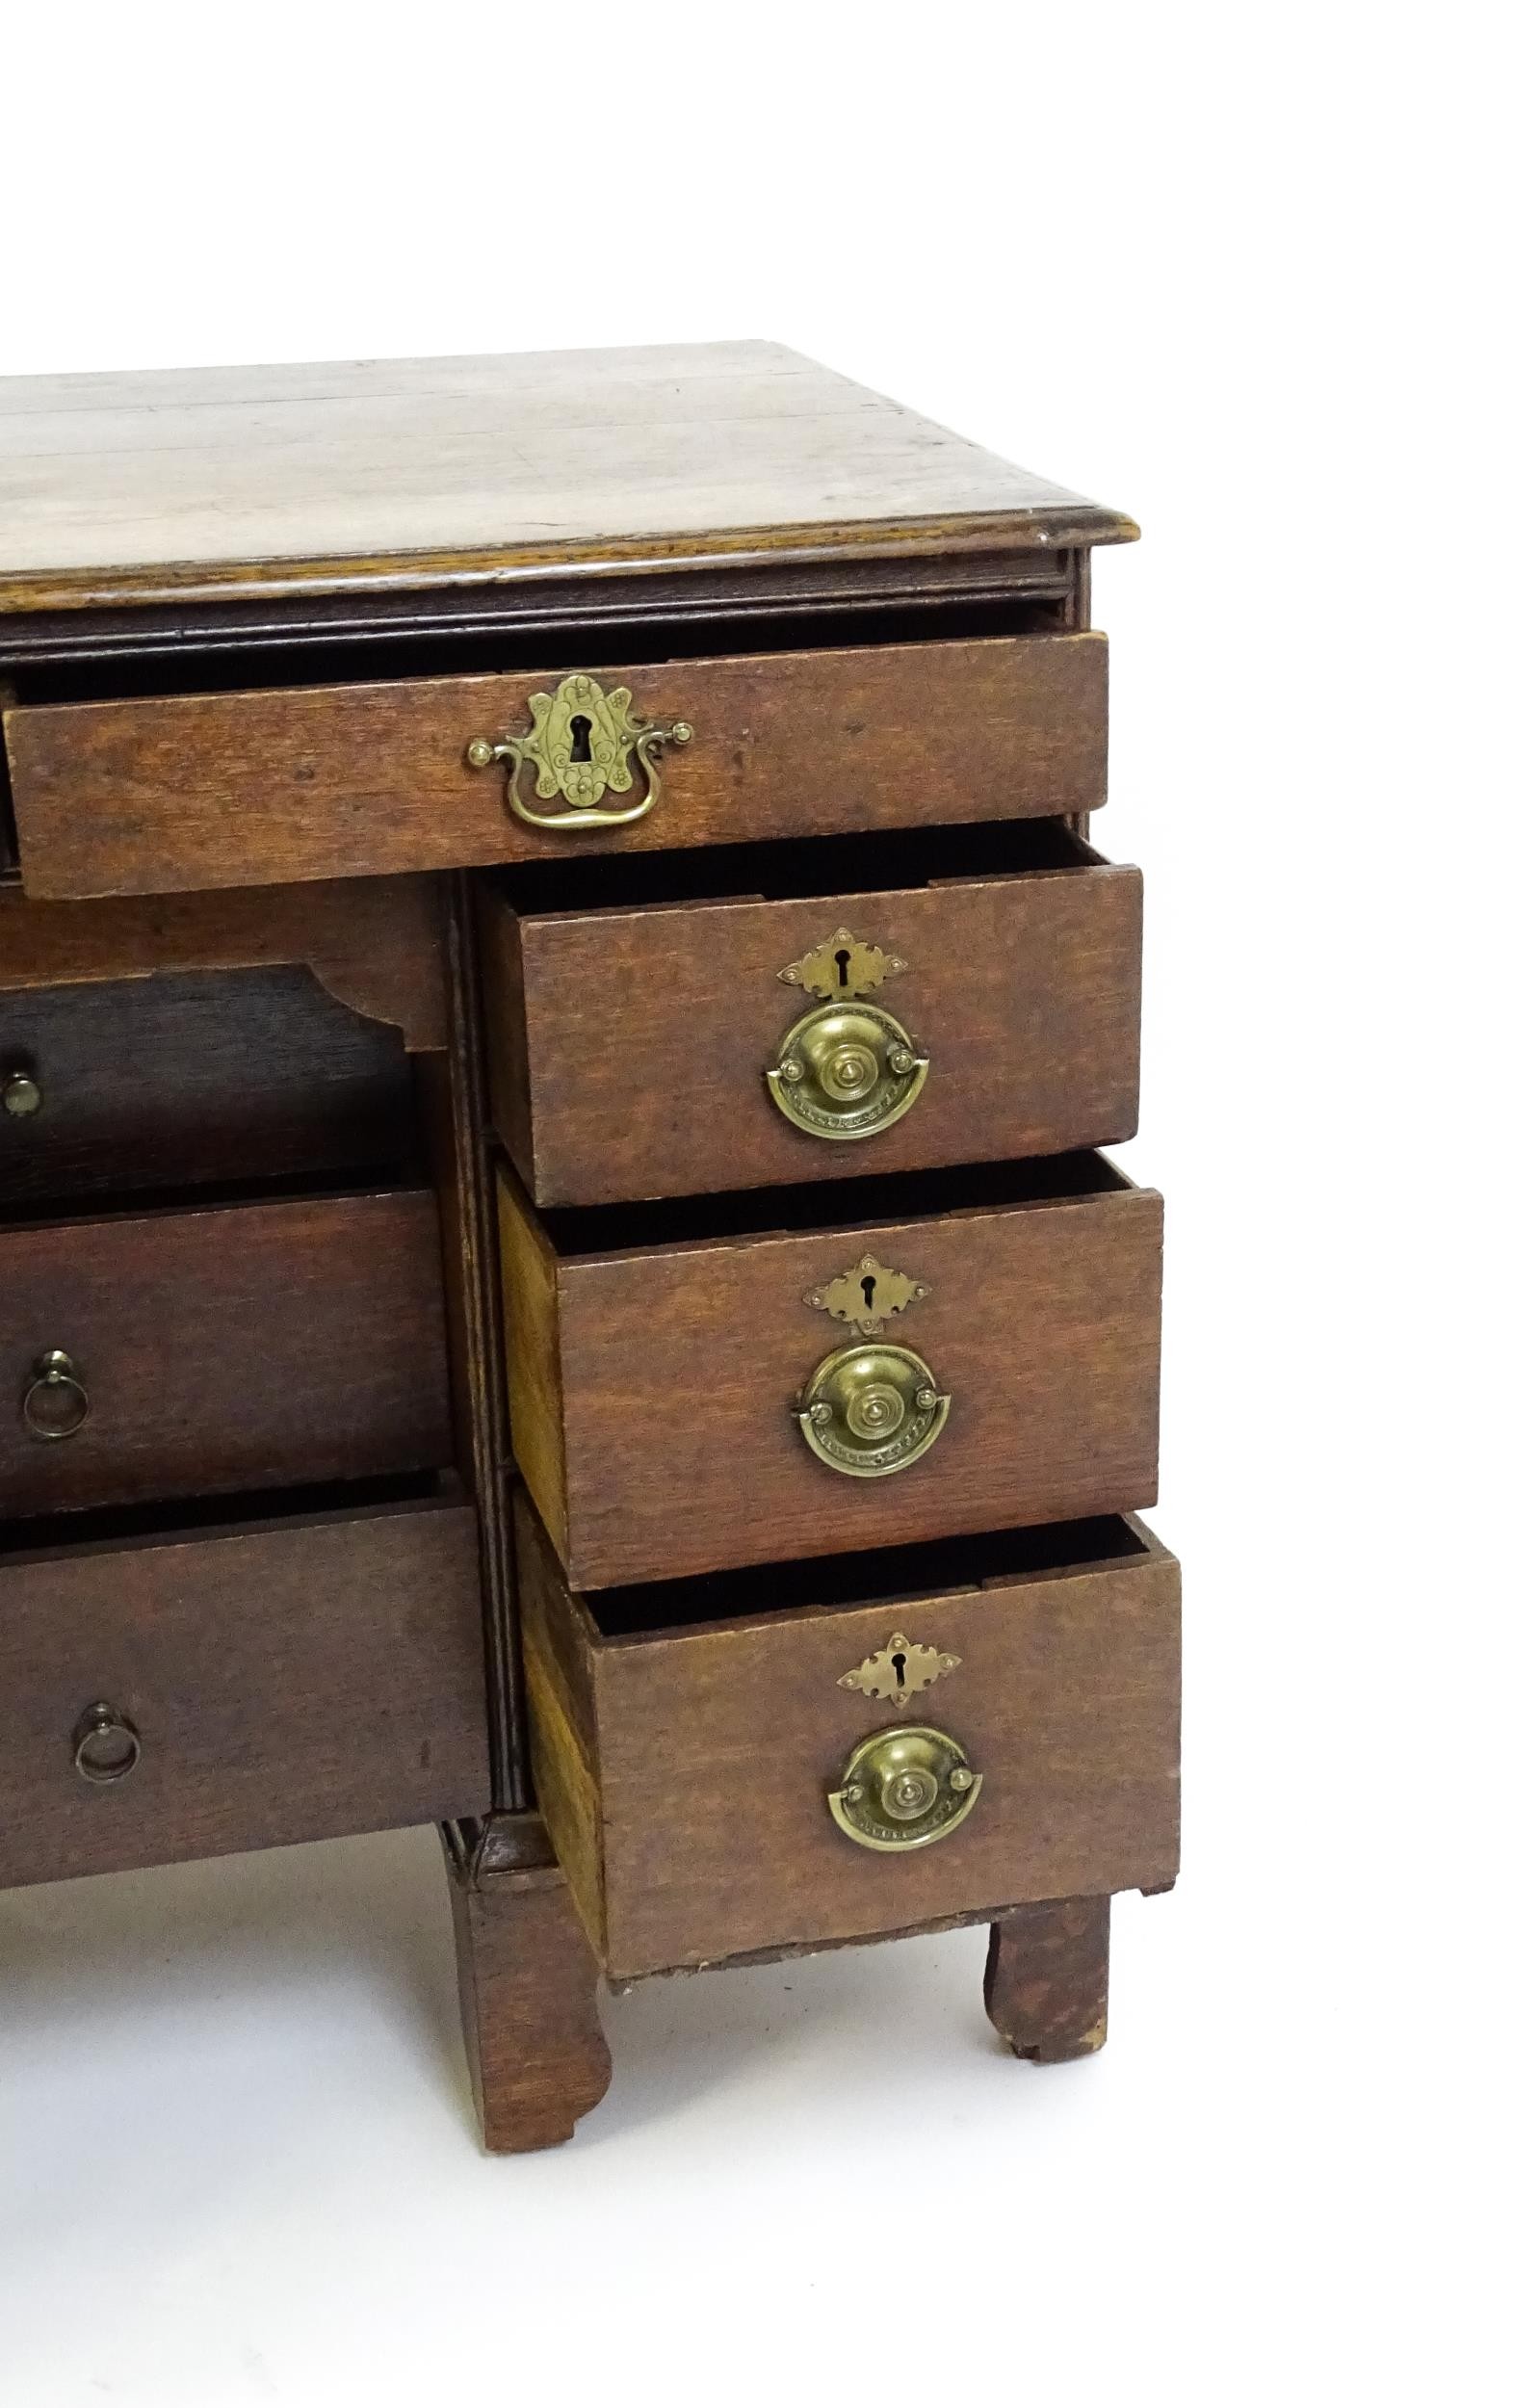 An early / mid 18thC oak kneehole desk with a moulded top above two short drawers and two banks of - Image 3 of 10